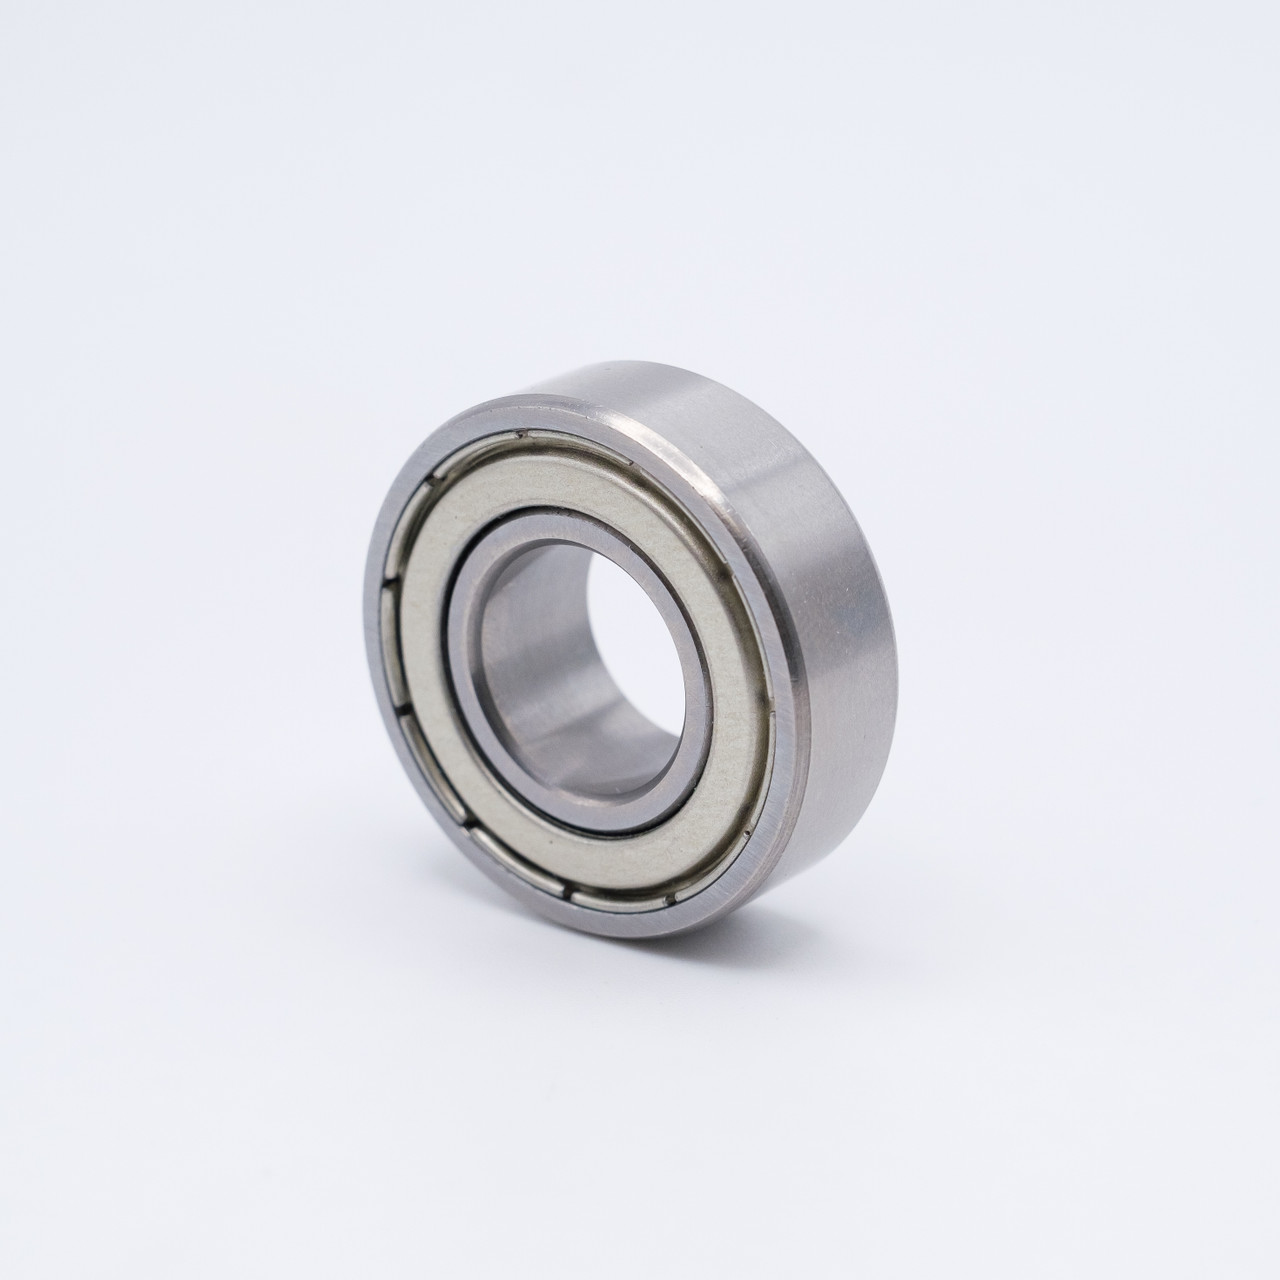 S682-ZZ Stainless Steel Miniature Ball Bearing 2x5x2.3mm Right Angled View